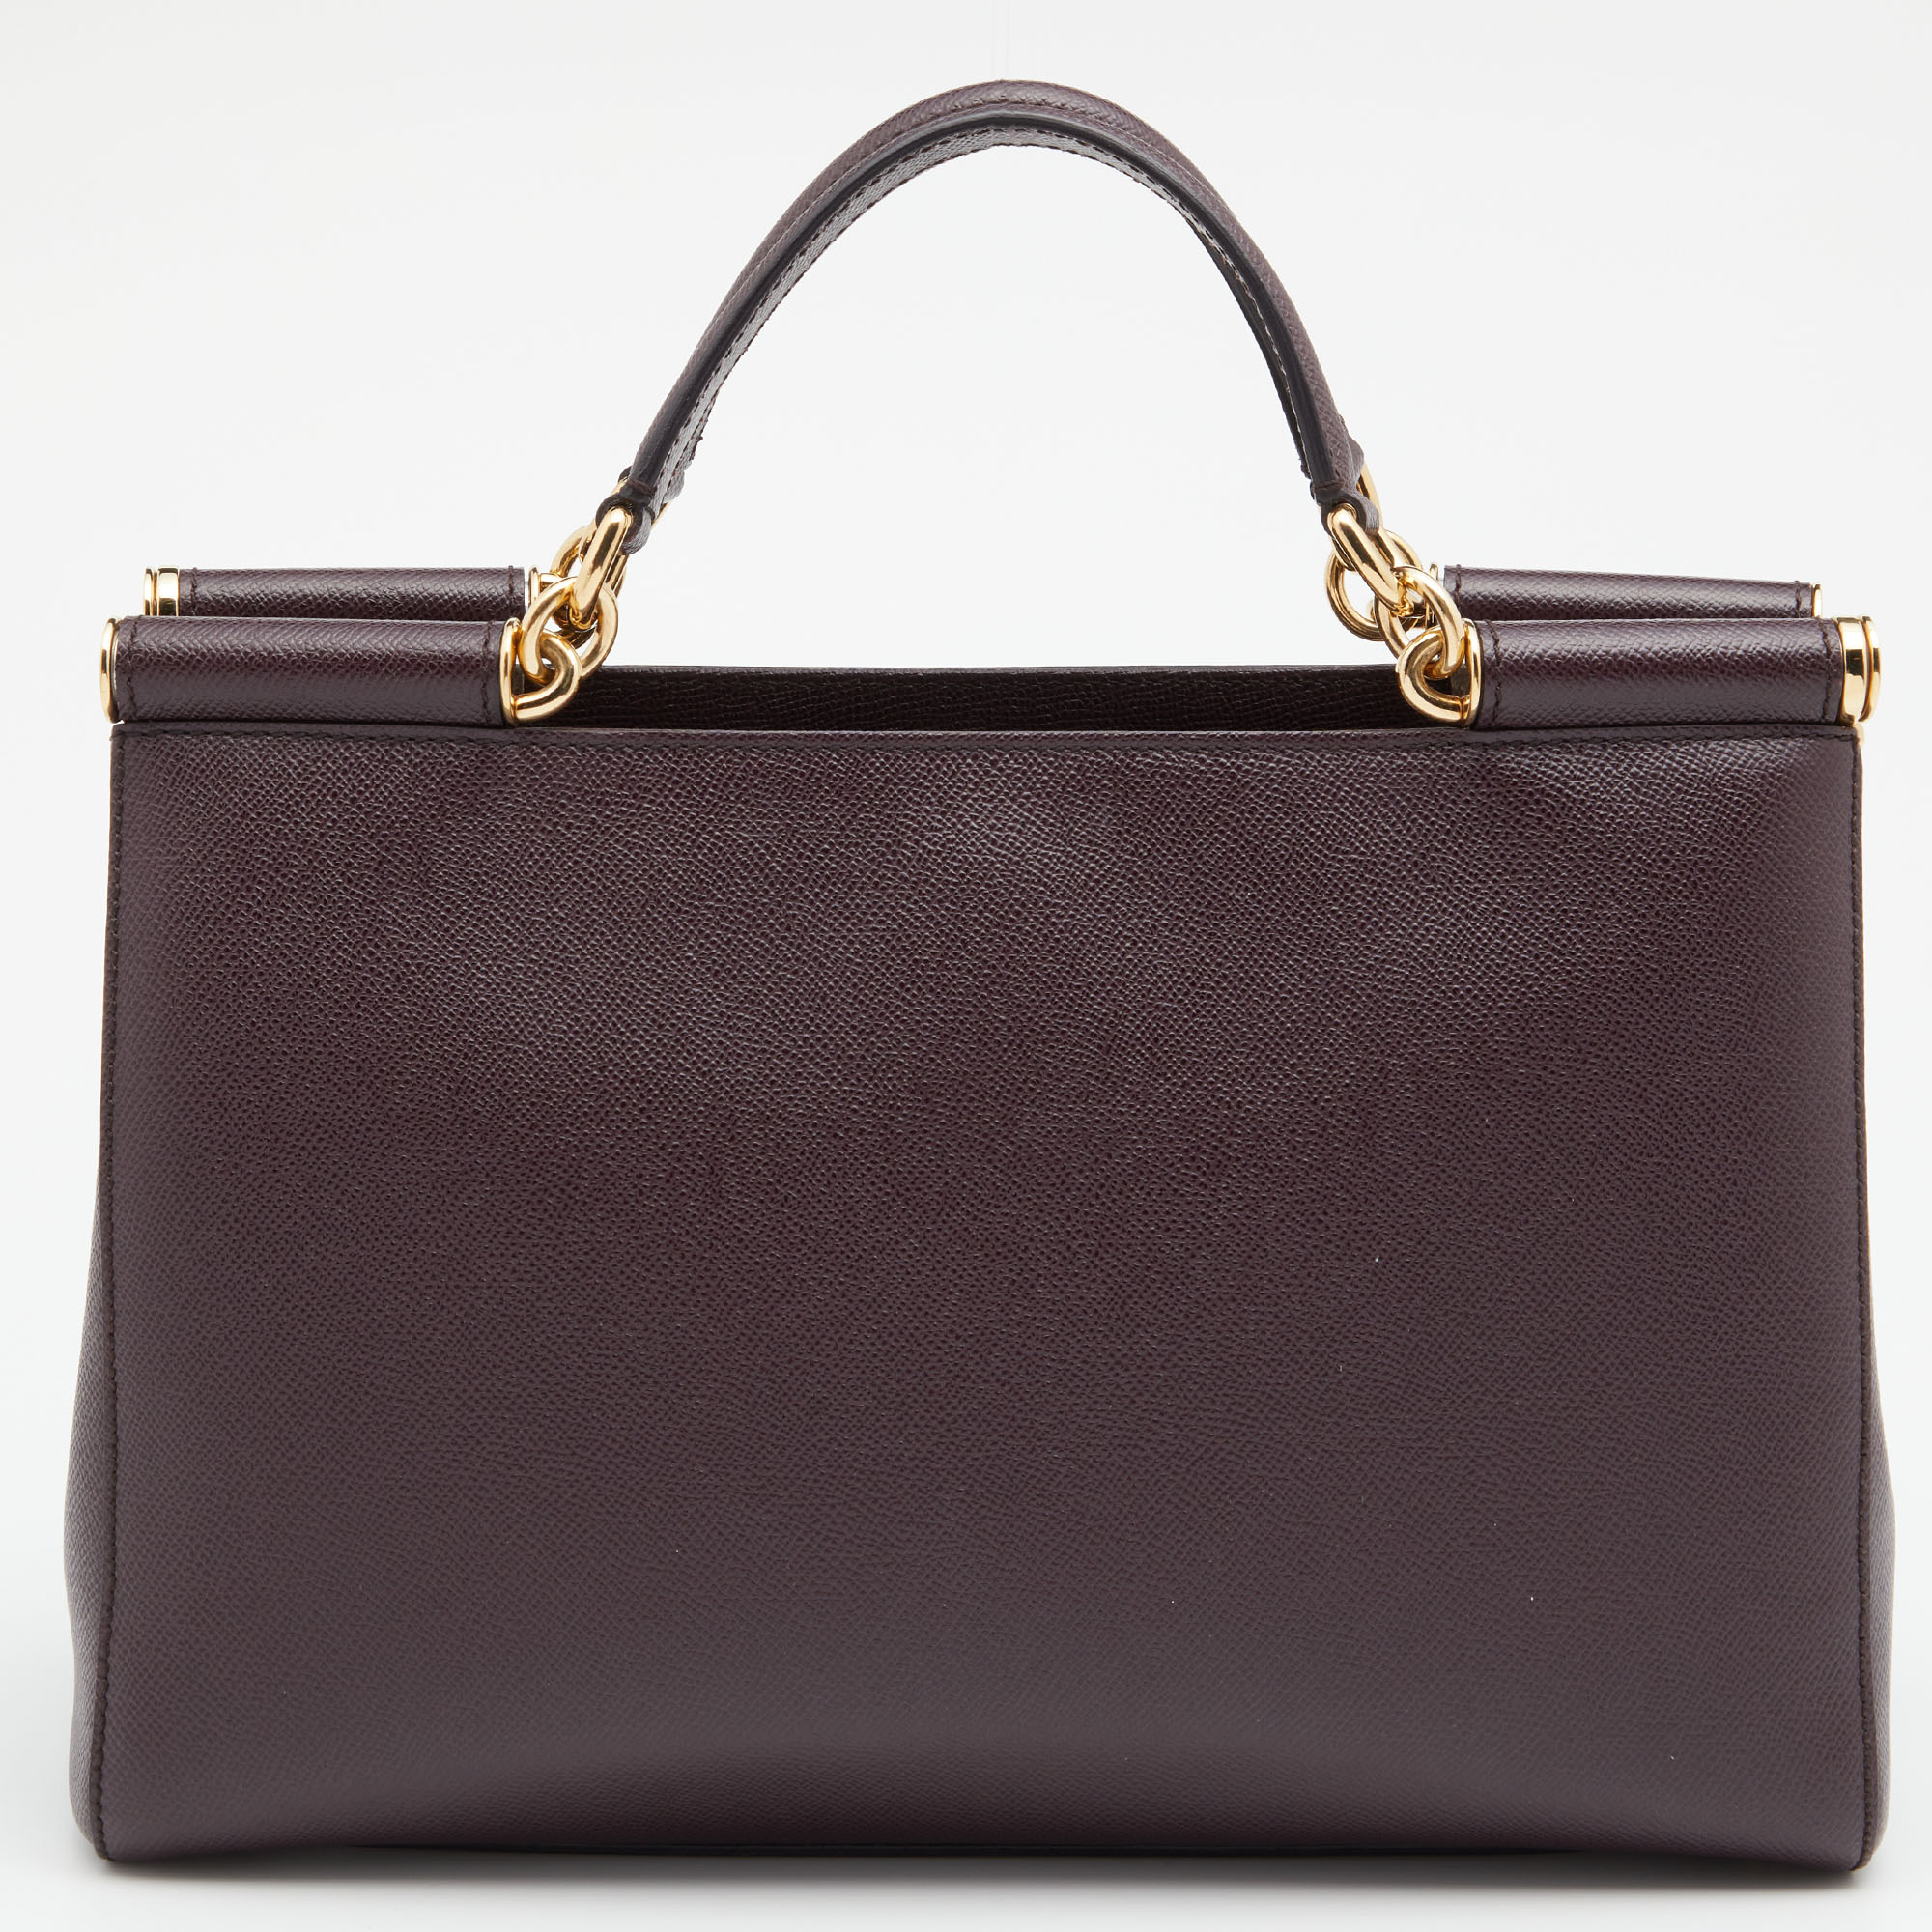 Dolce & Gabbana Burgundy Leather Miss Sicily Tote